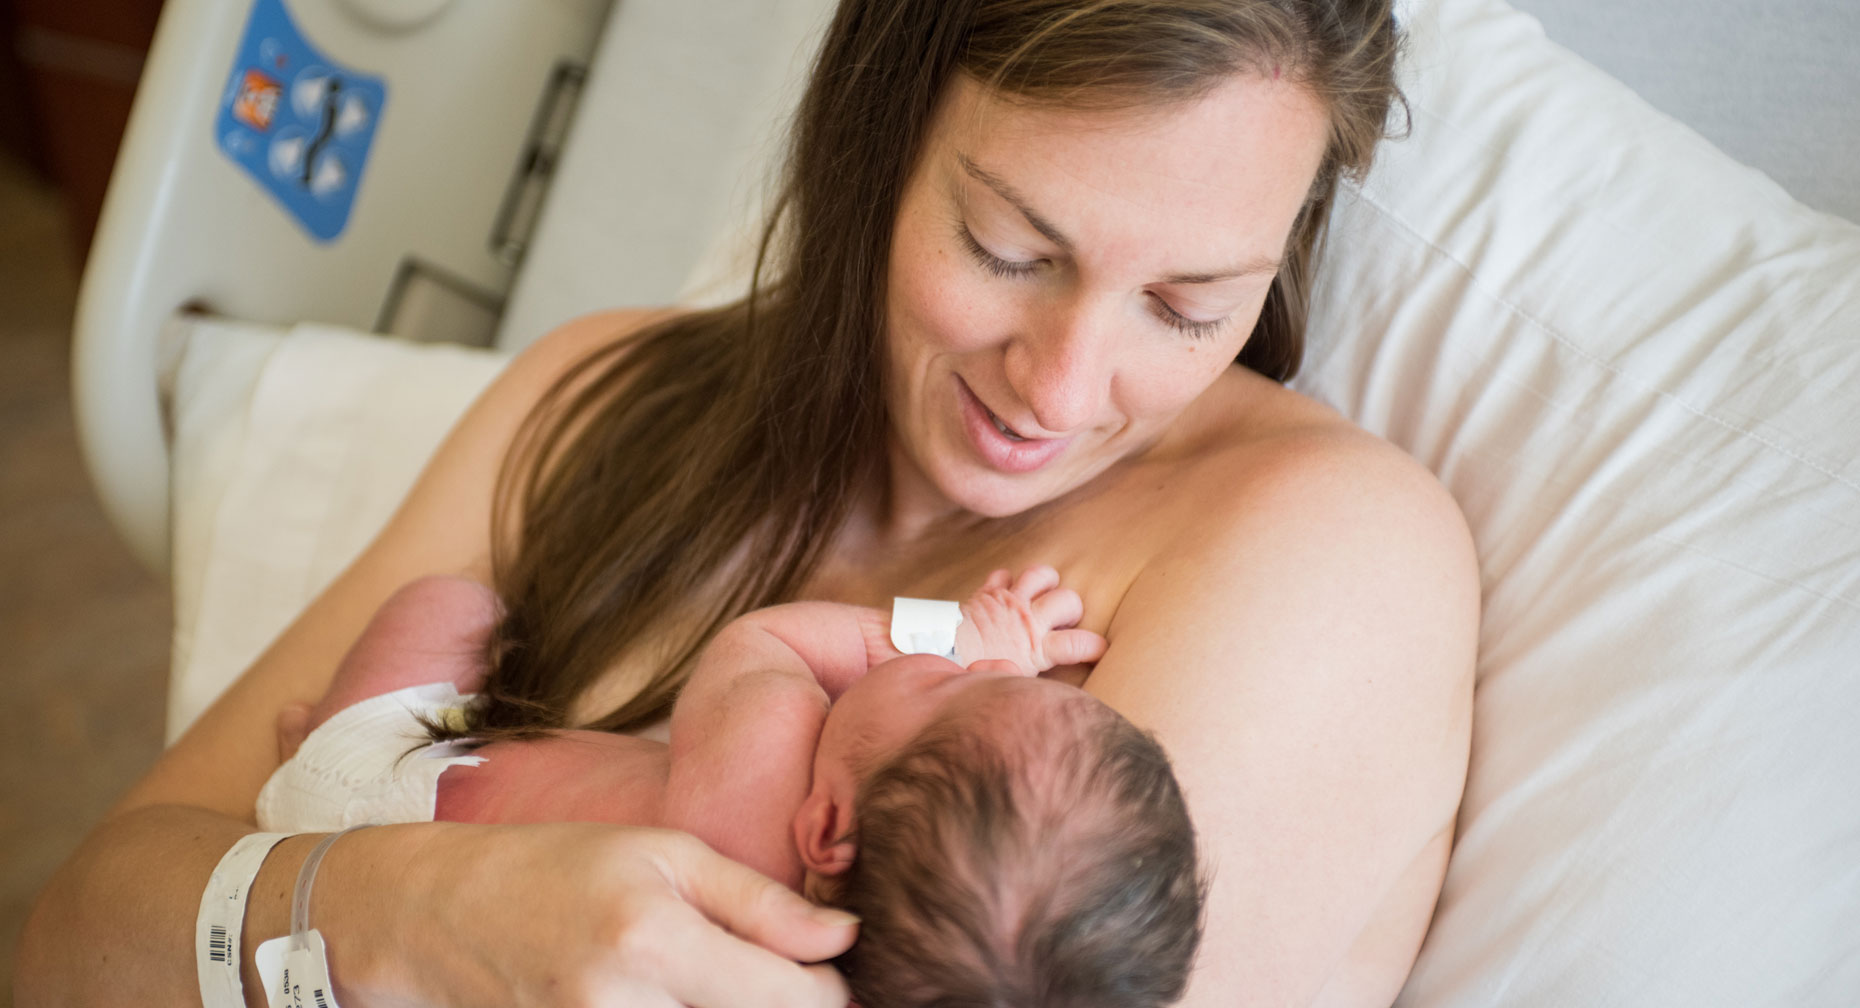 Skin-to-Skin Contact: Bond With Your Newborn